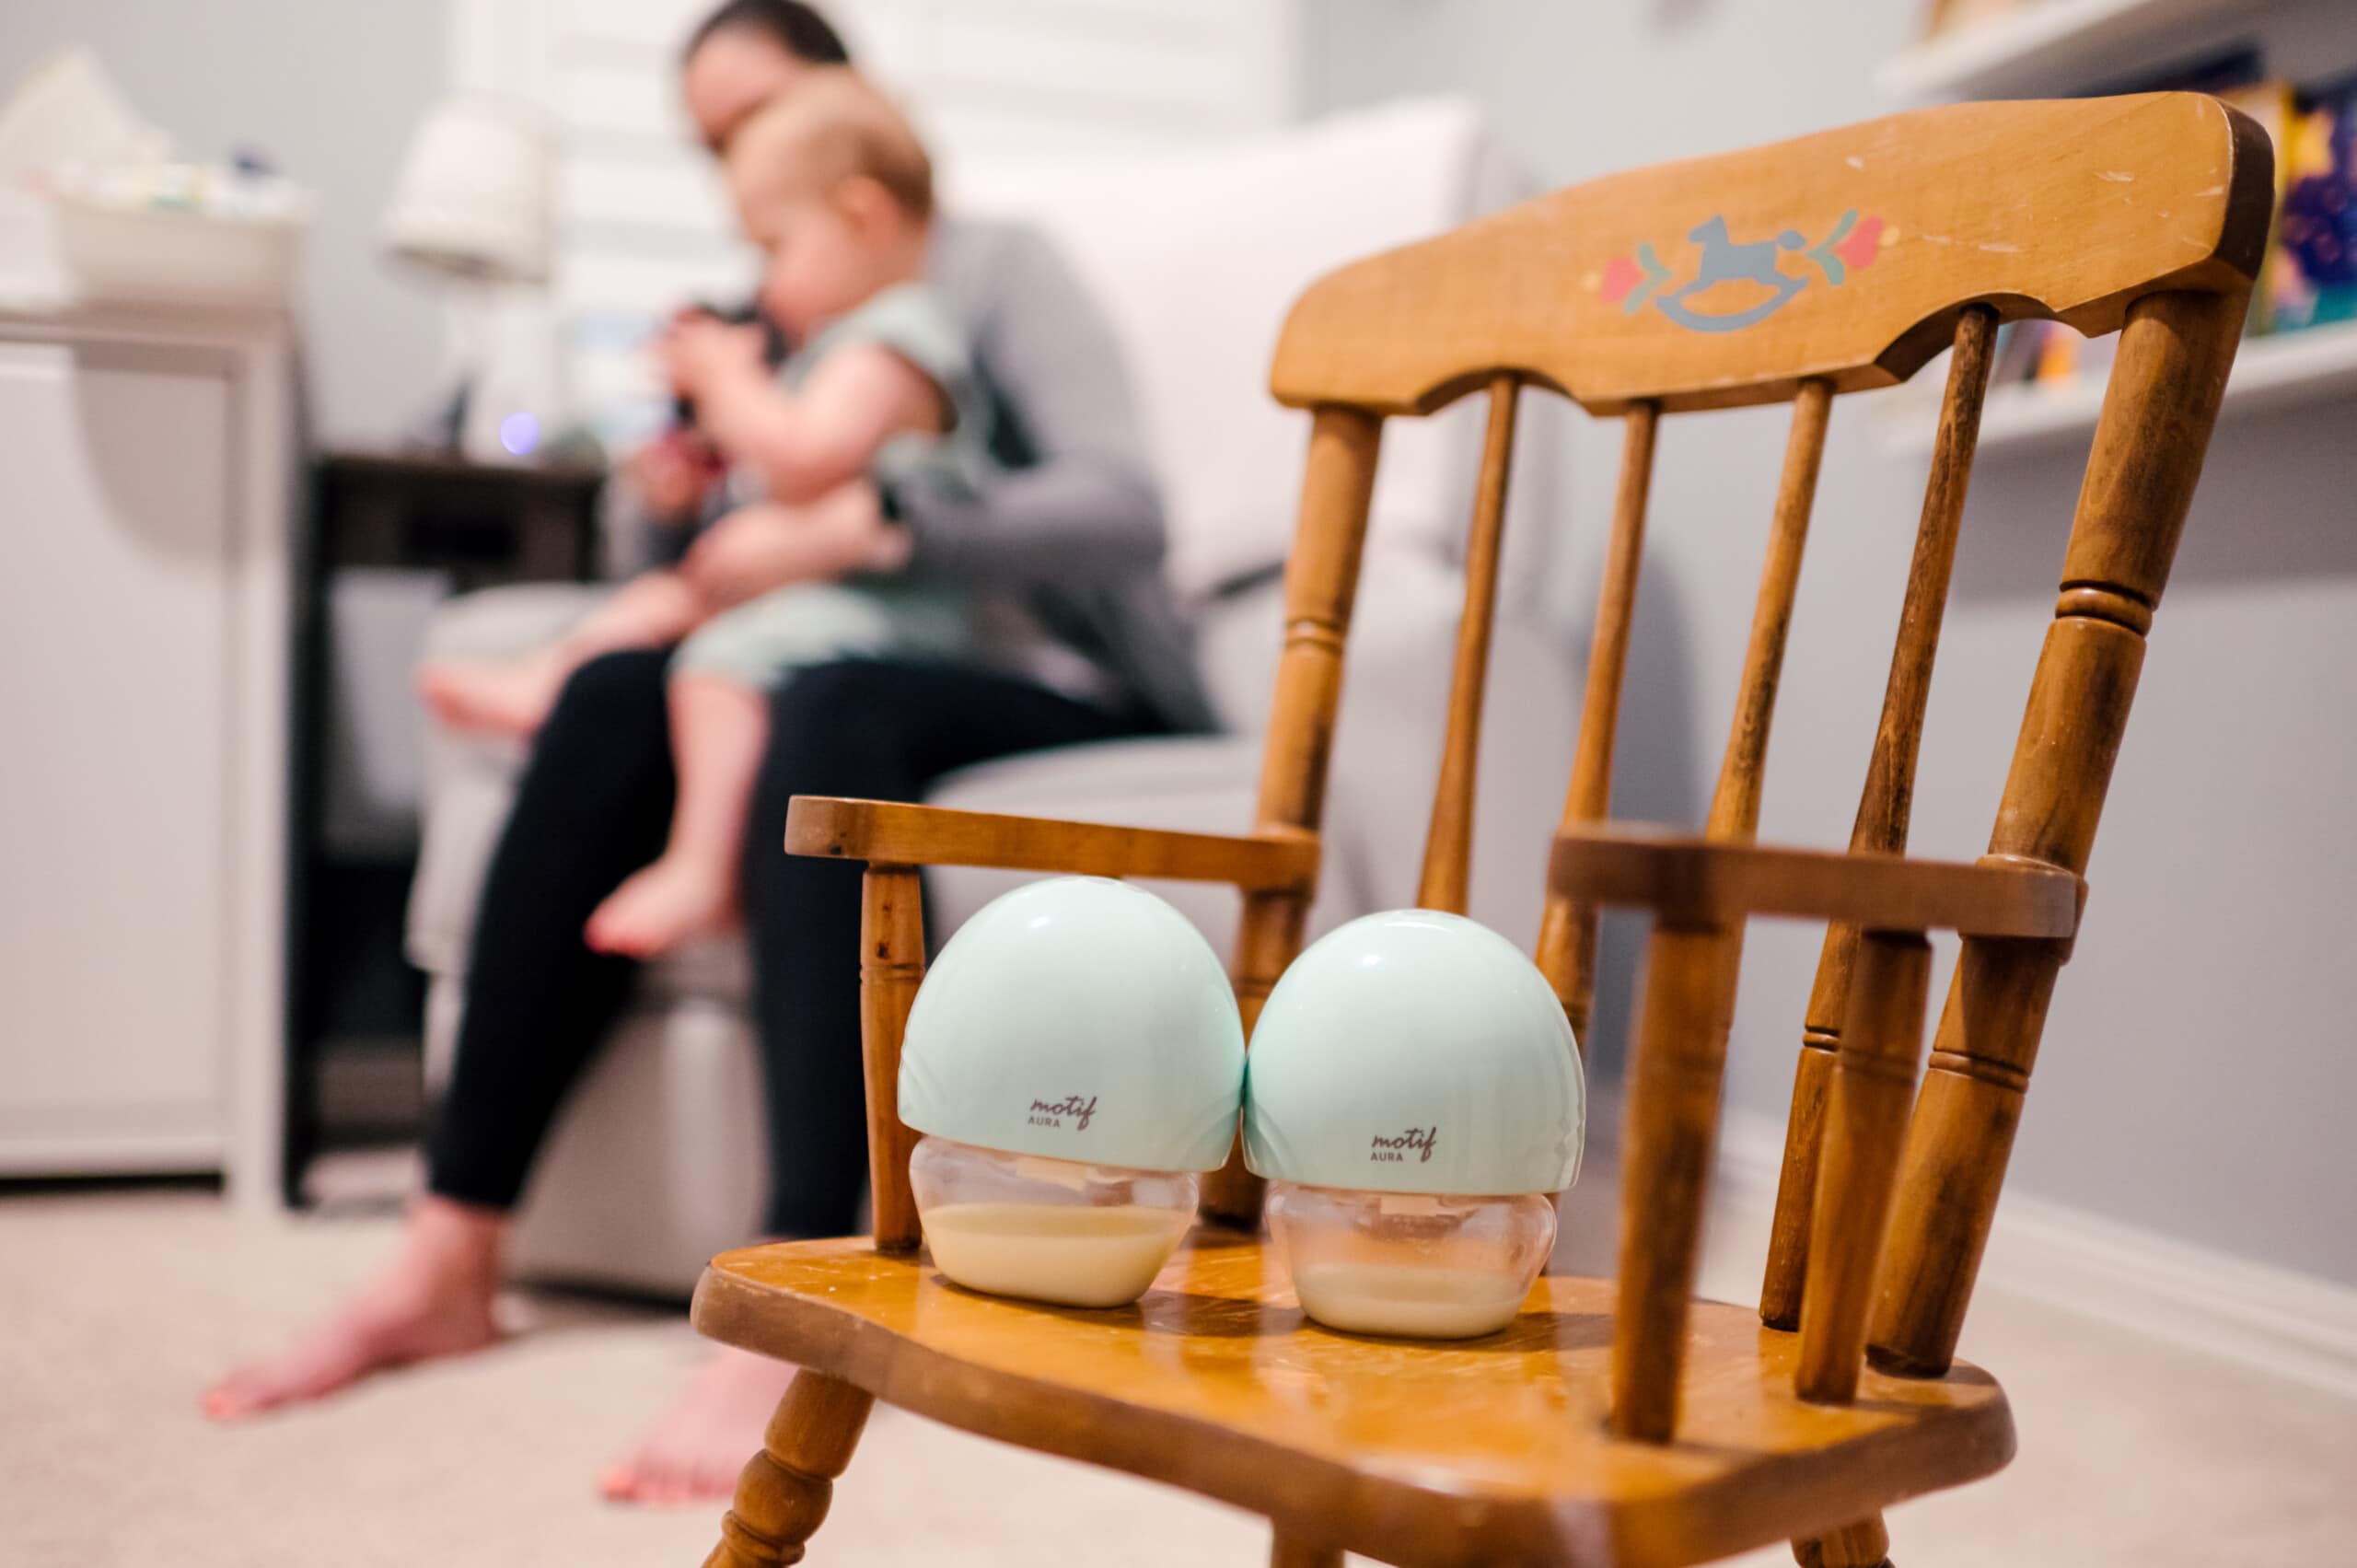 The Motif Aura breast pumps are sitting on a rocking chair in the foreground and a mom and her baby boy are sitting on the glider in the nursery in the background.